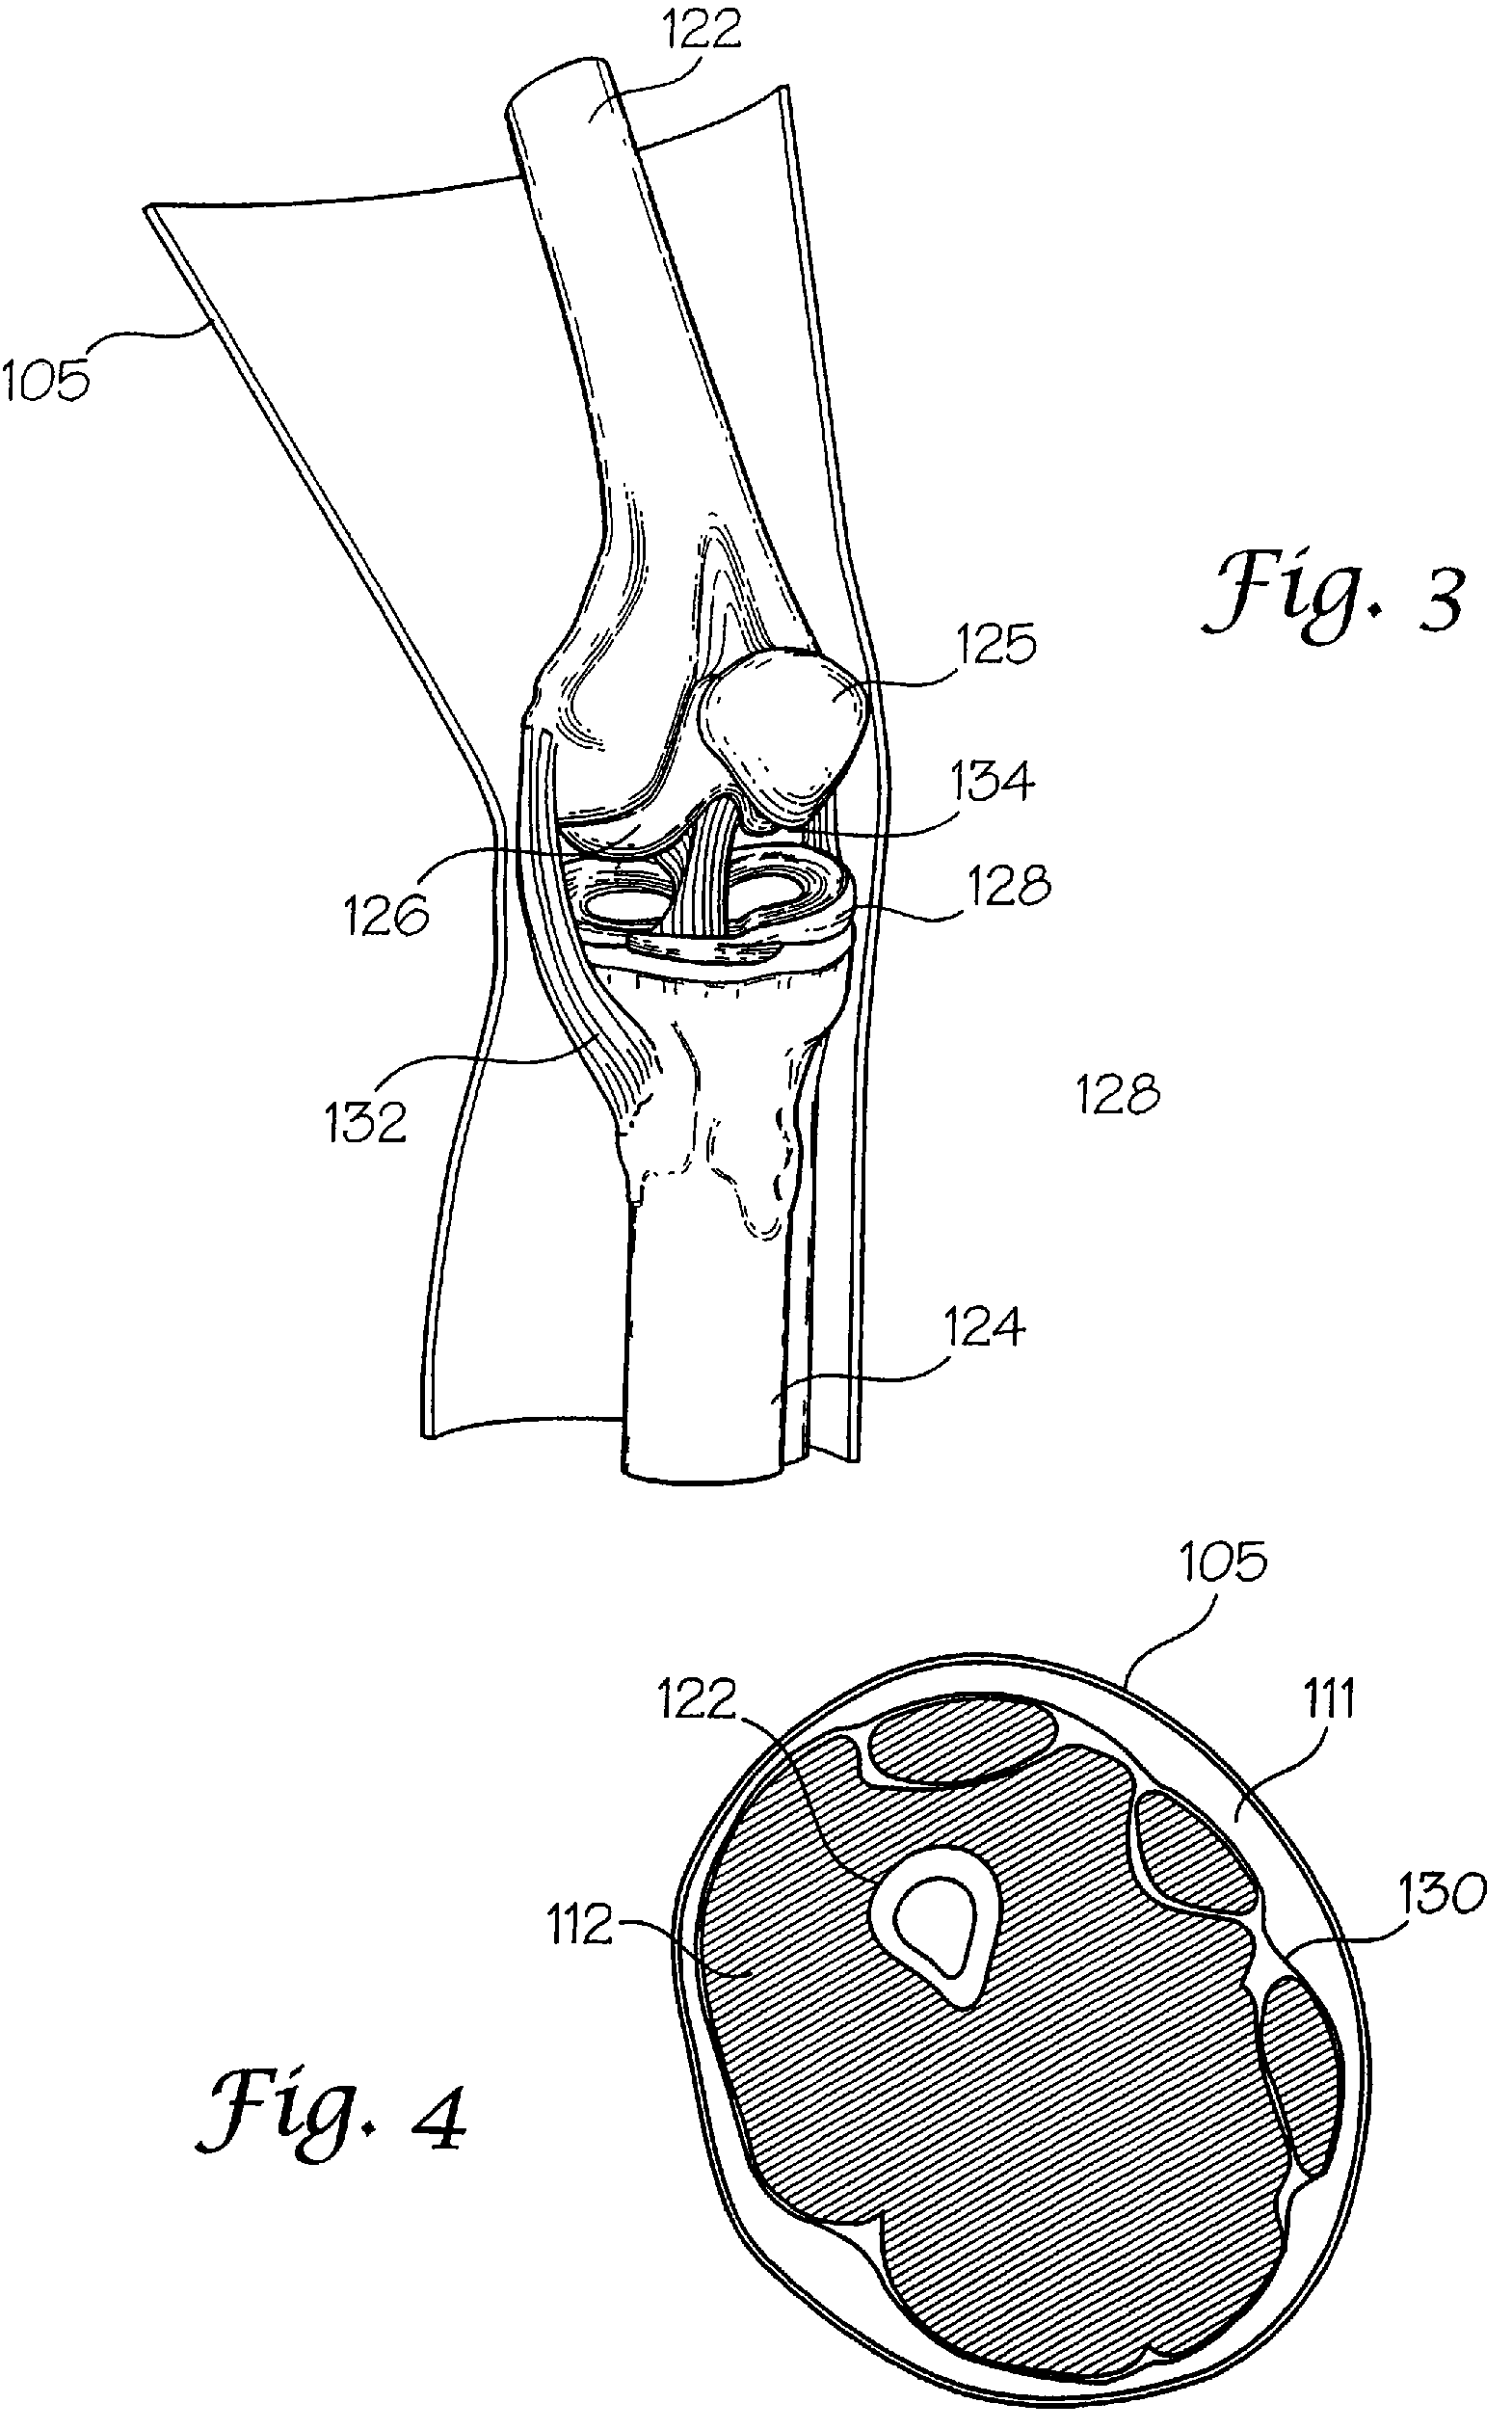 Joint replica models and methods of using same for testing medical devices